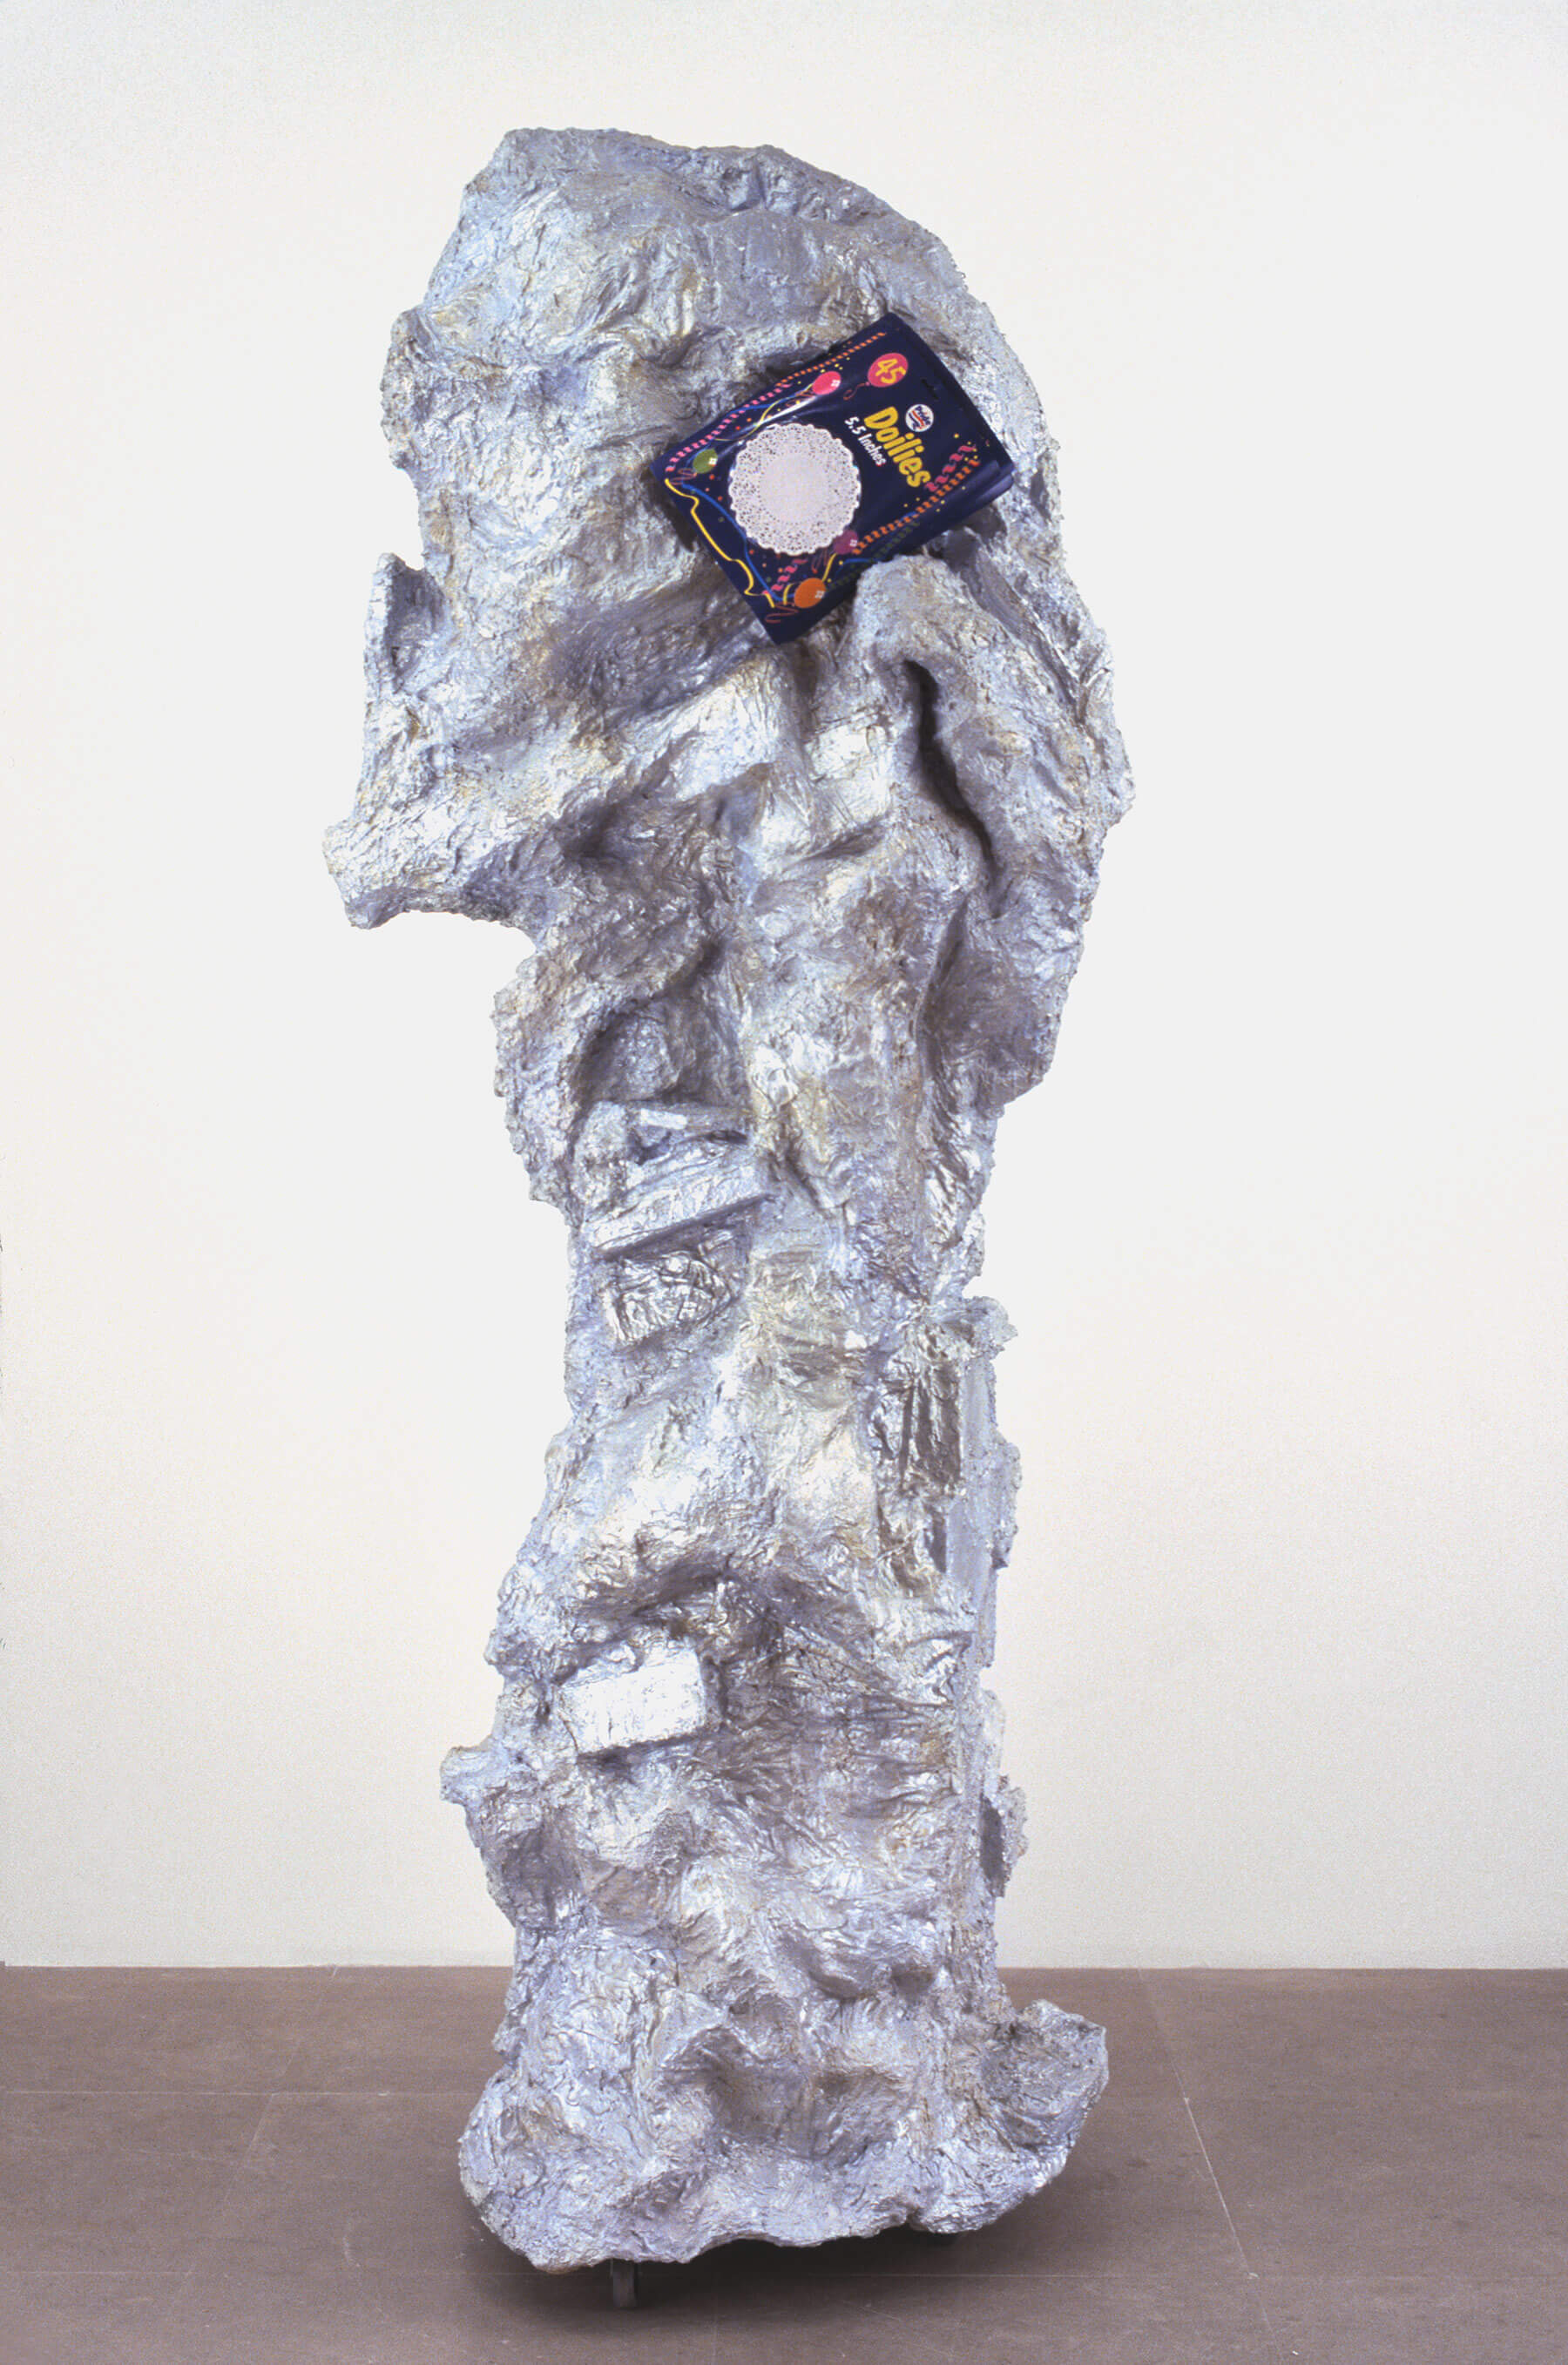  Rachel Harrison, <em>Hail to Reason</em>, 2004. Wood, chicken wire, polystyrene, cement, acrylic, doilies, wheels, portable DVD player, and Fleischmanns's Auction (2003) video, color/sound  100 x 39 x 36 inches (254 x 99.1 x 91.4 cm) Video: 27:44 min (looped)